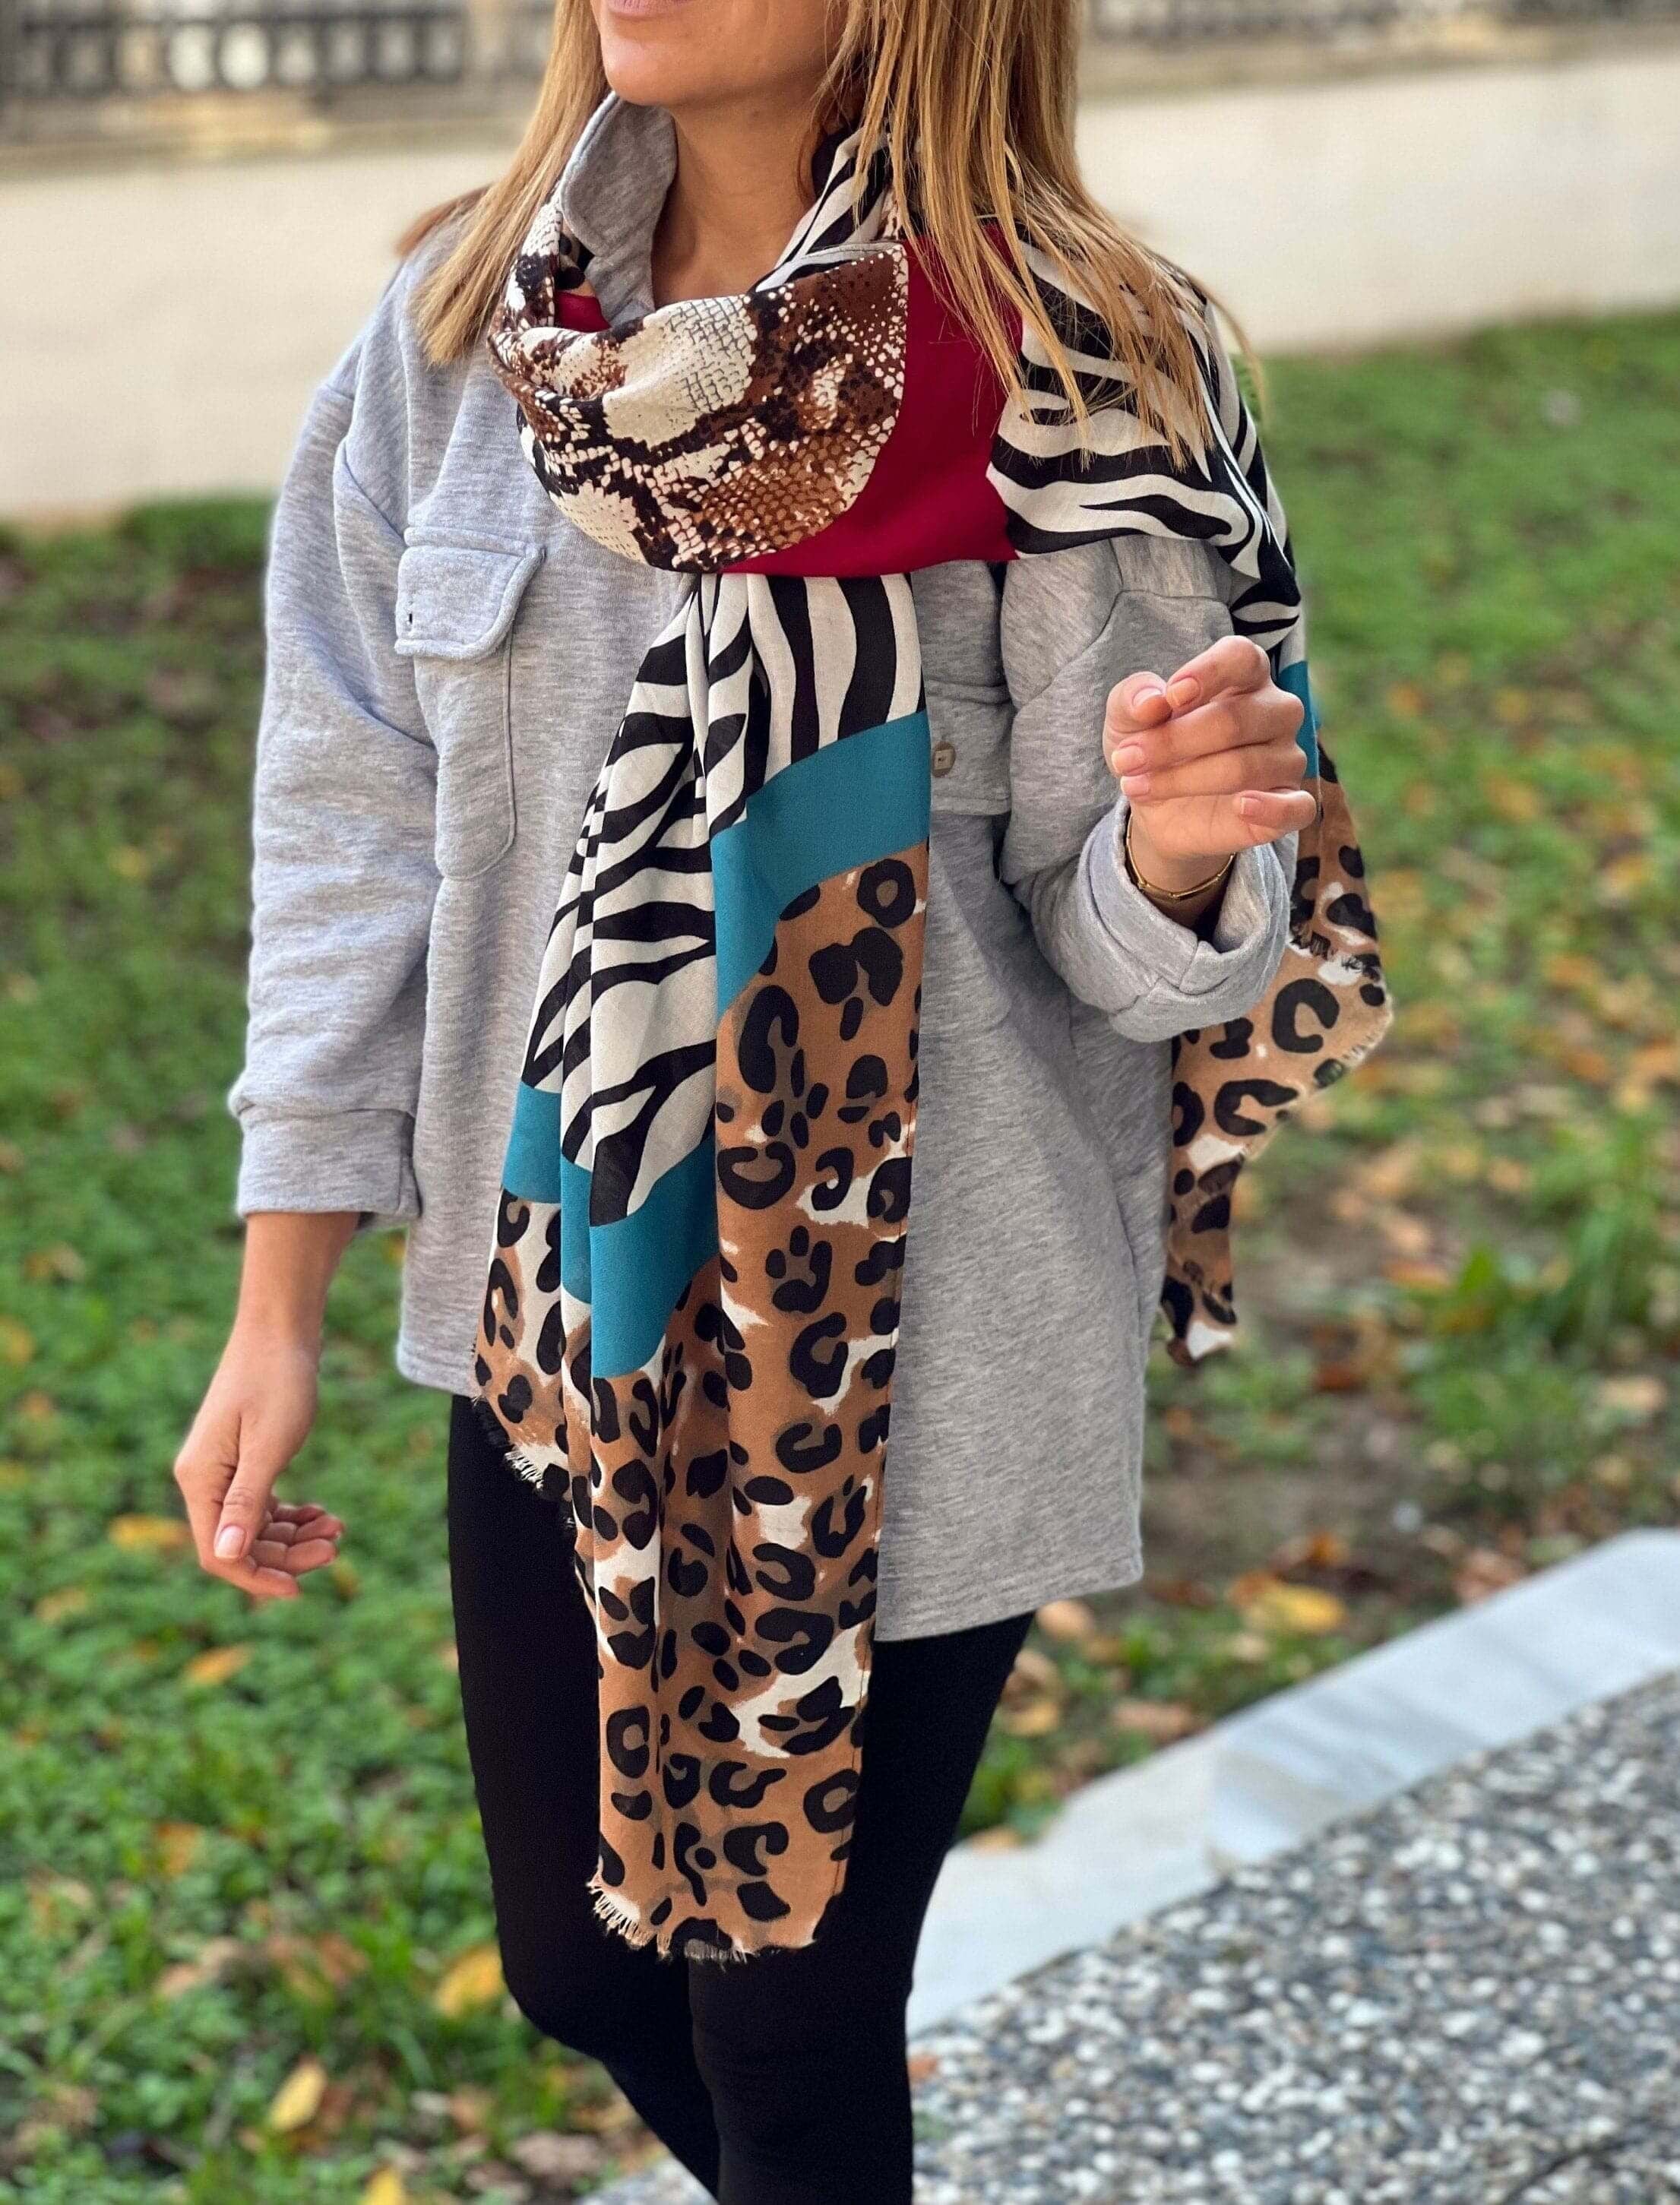 Whether you&#39;re dressing up for a night out or running errands around town, this versatile scarf is the perfect accessory. It&#39;s lightweight, breathable, and easy to wear, making it ideal for any occasion.